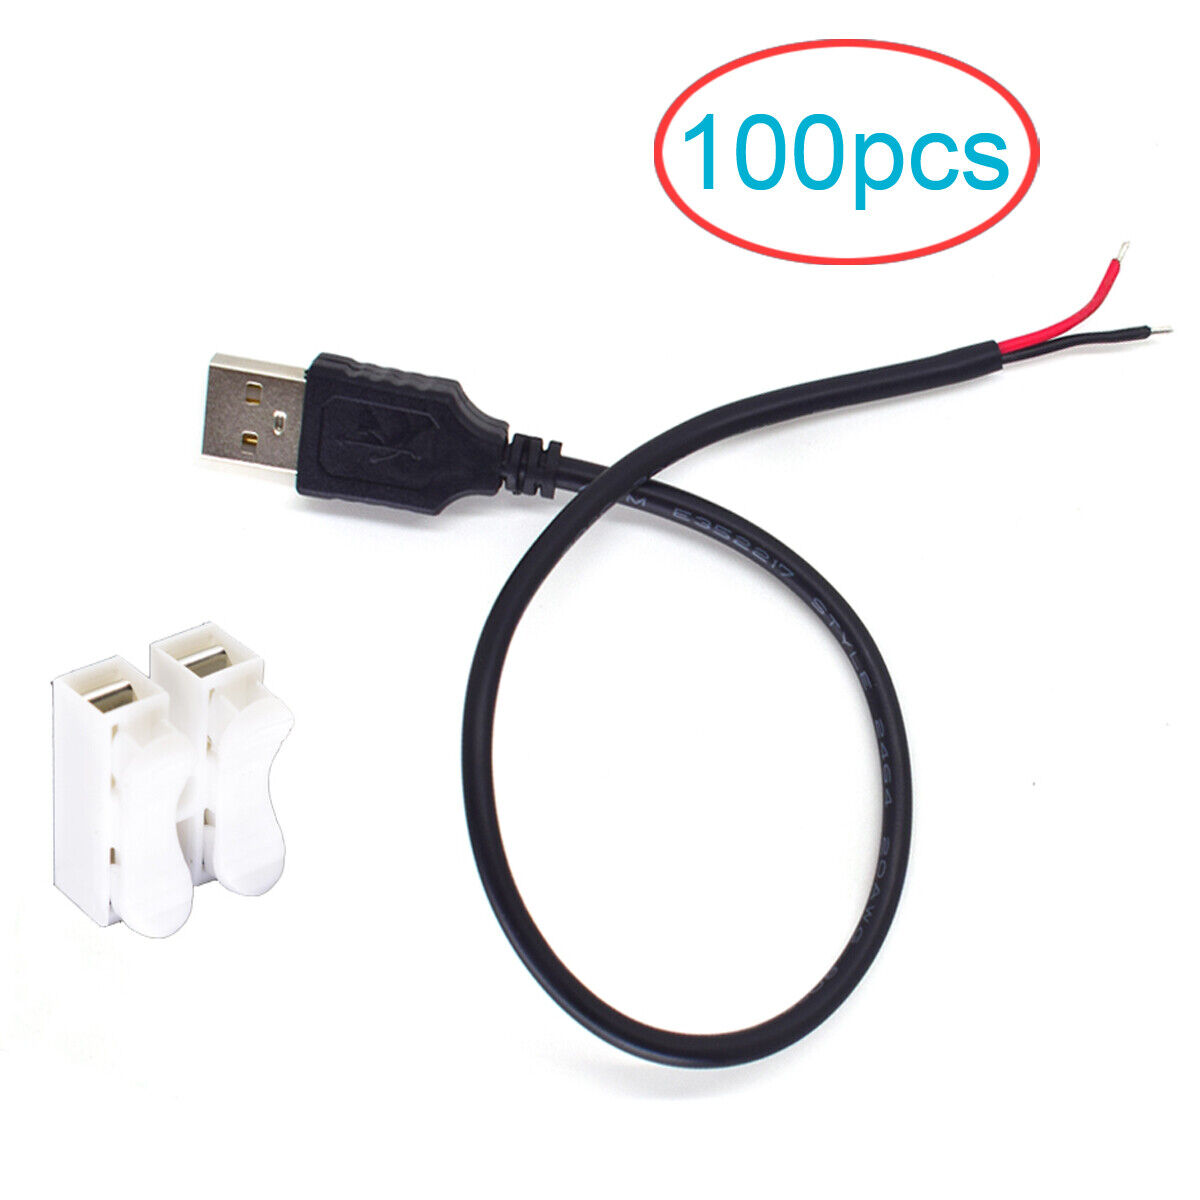 0.3M/1FT USB Male to Bare Wire Cable 20AWG 5A USB2.0 2pin DIY Pigtail Cable Lot